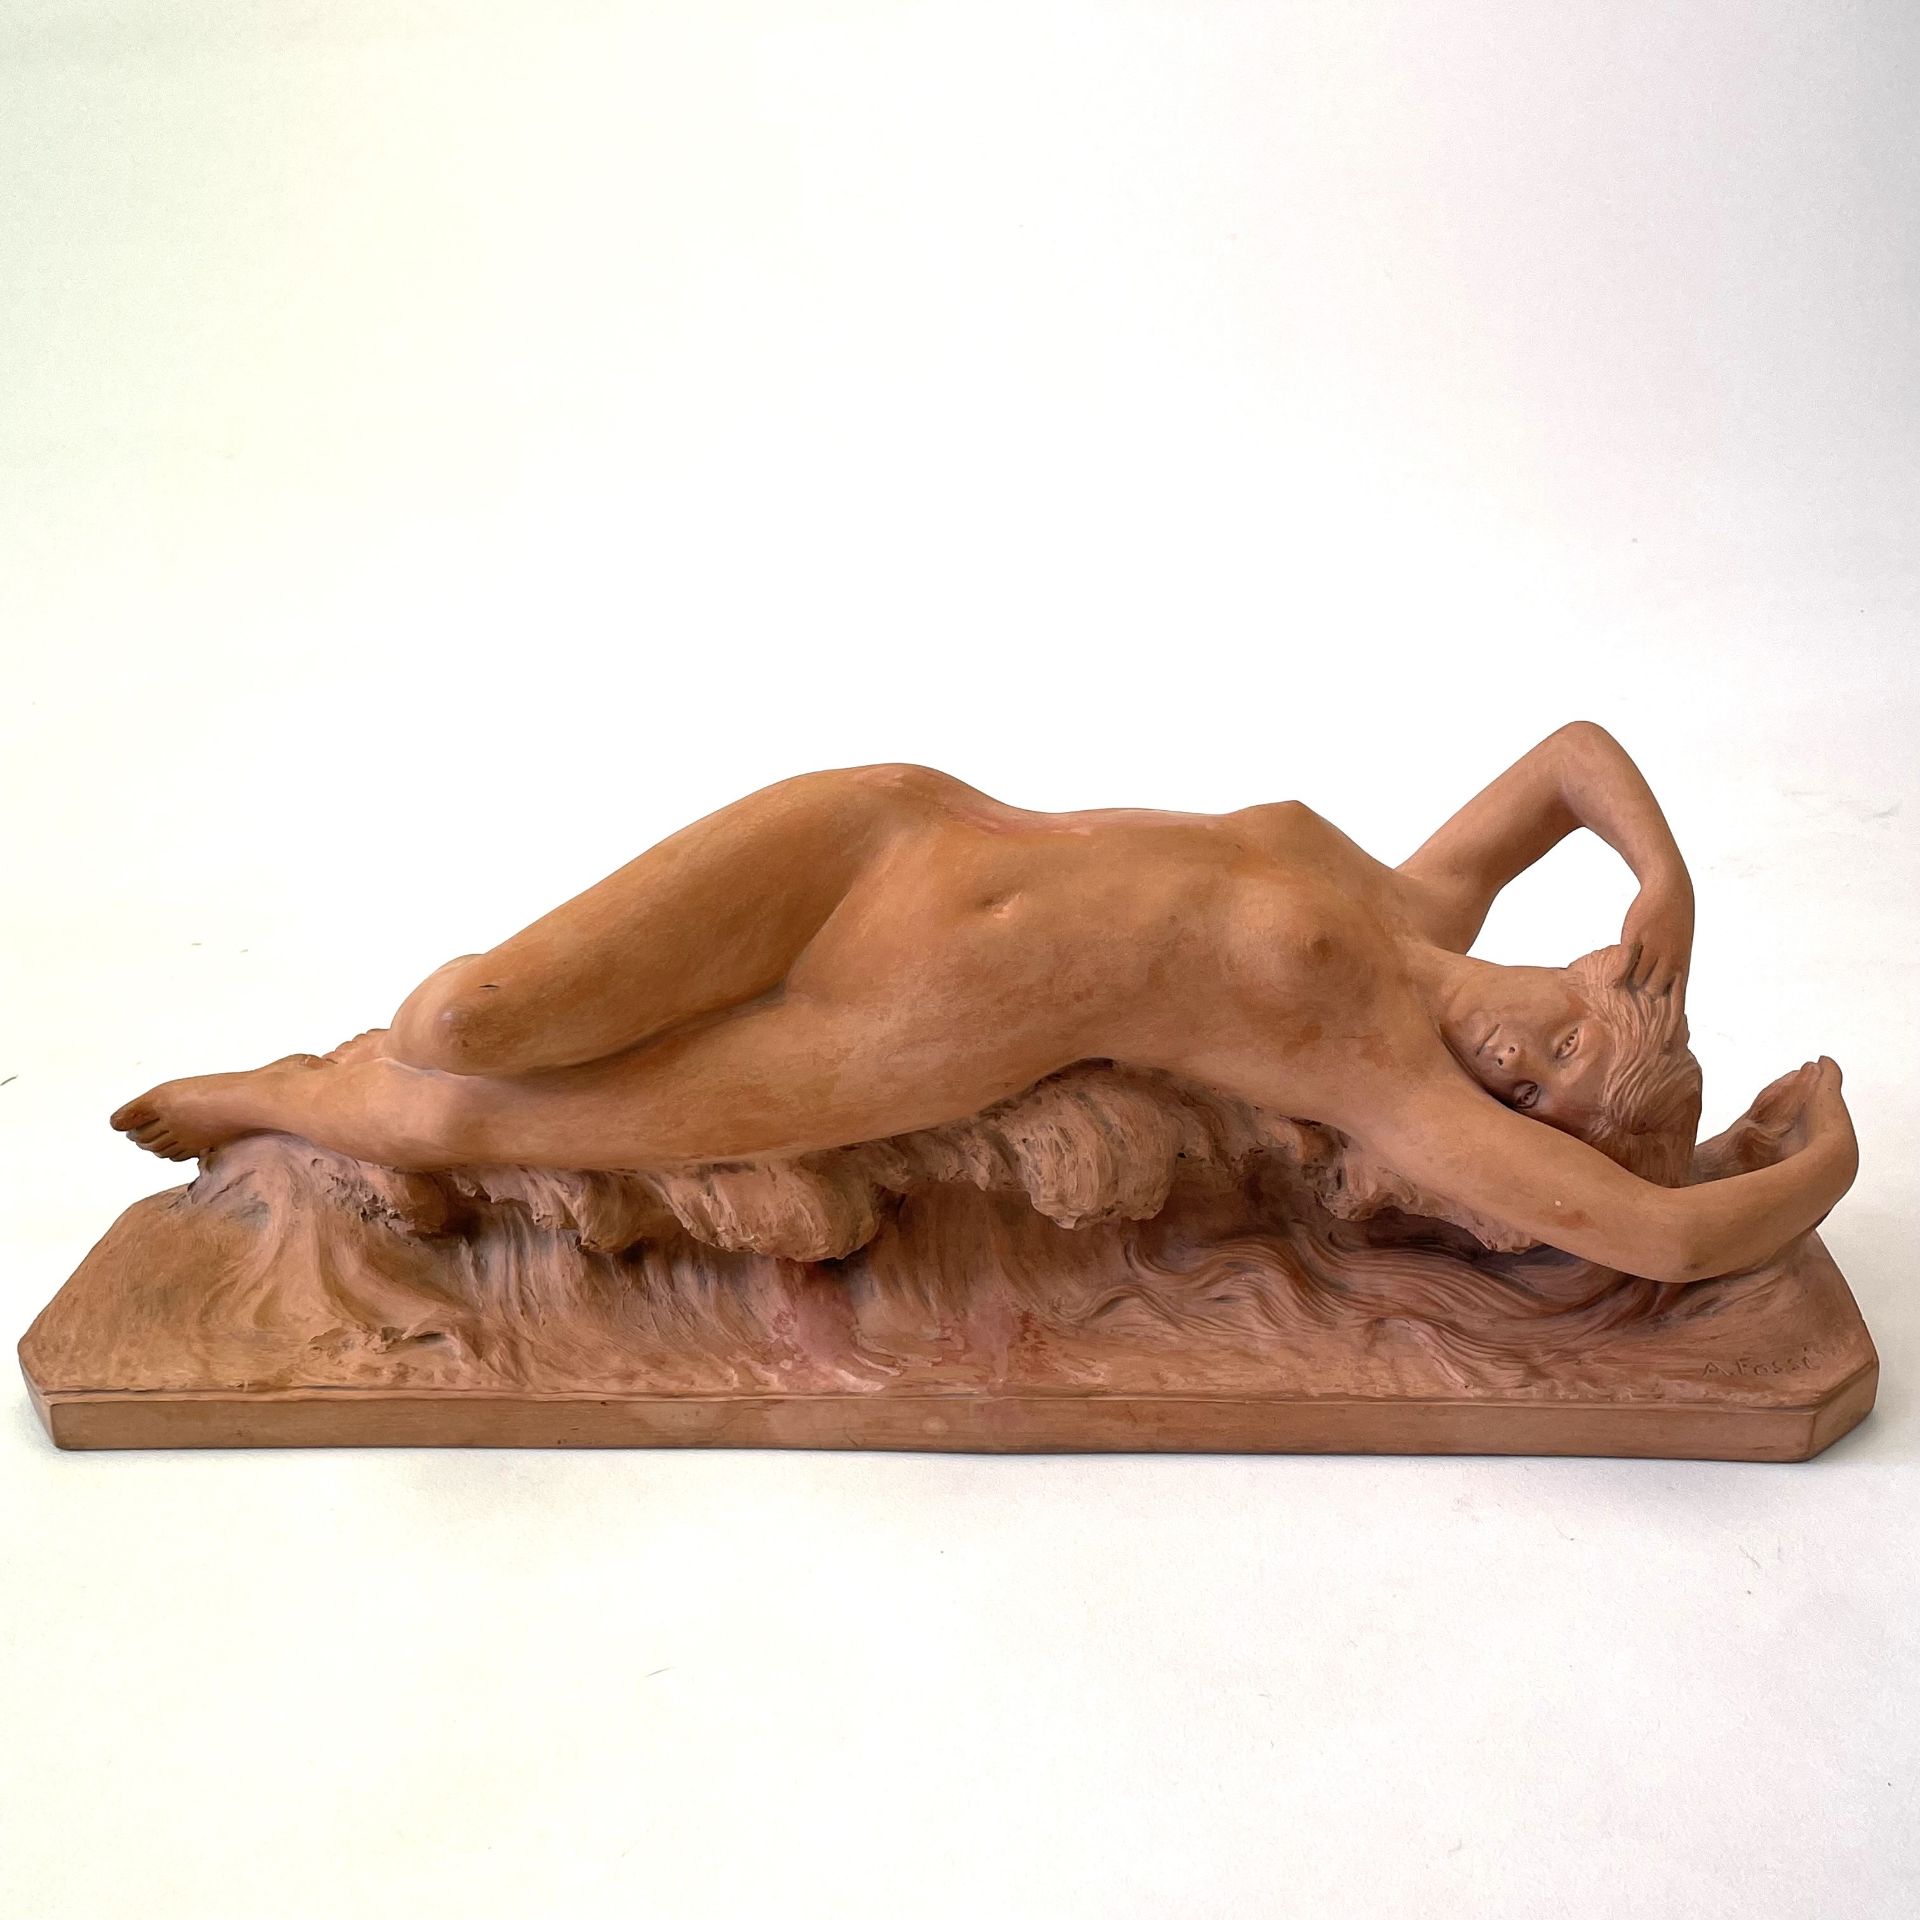 An early 20thC French terracotta sculpture of a naked female figure stamped verso "Terre cuite d'